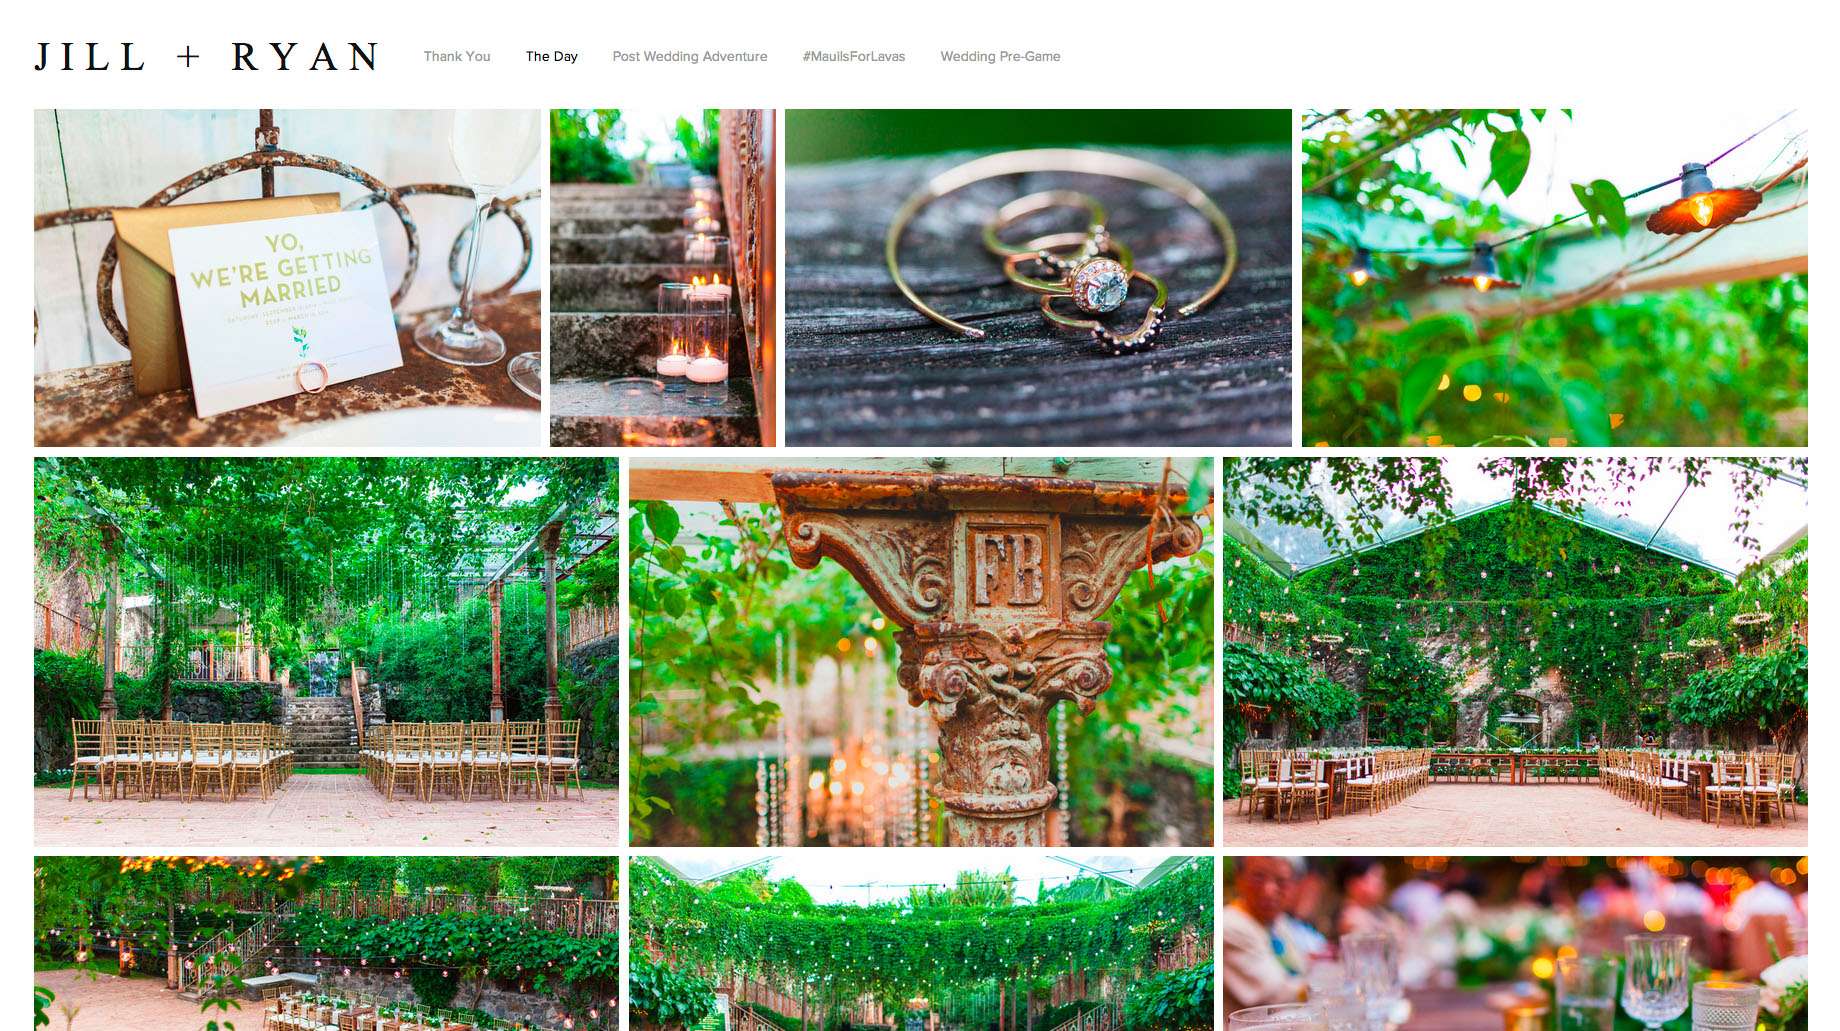 Start Your Own 'Wed-Site' with Squarespace3